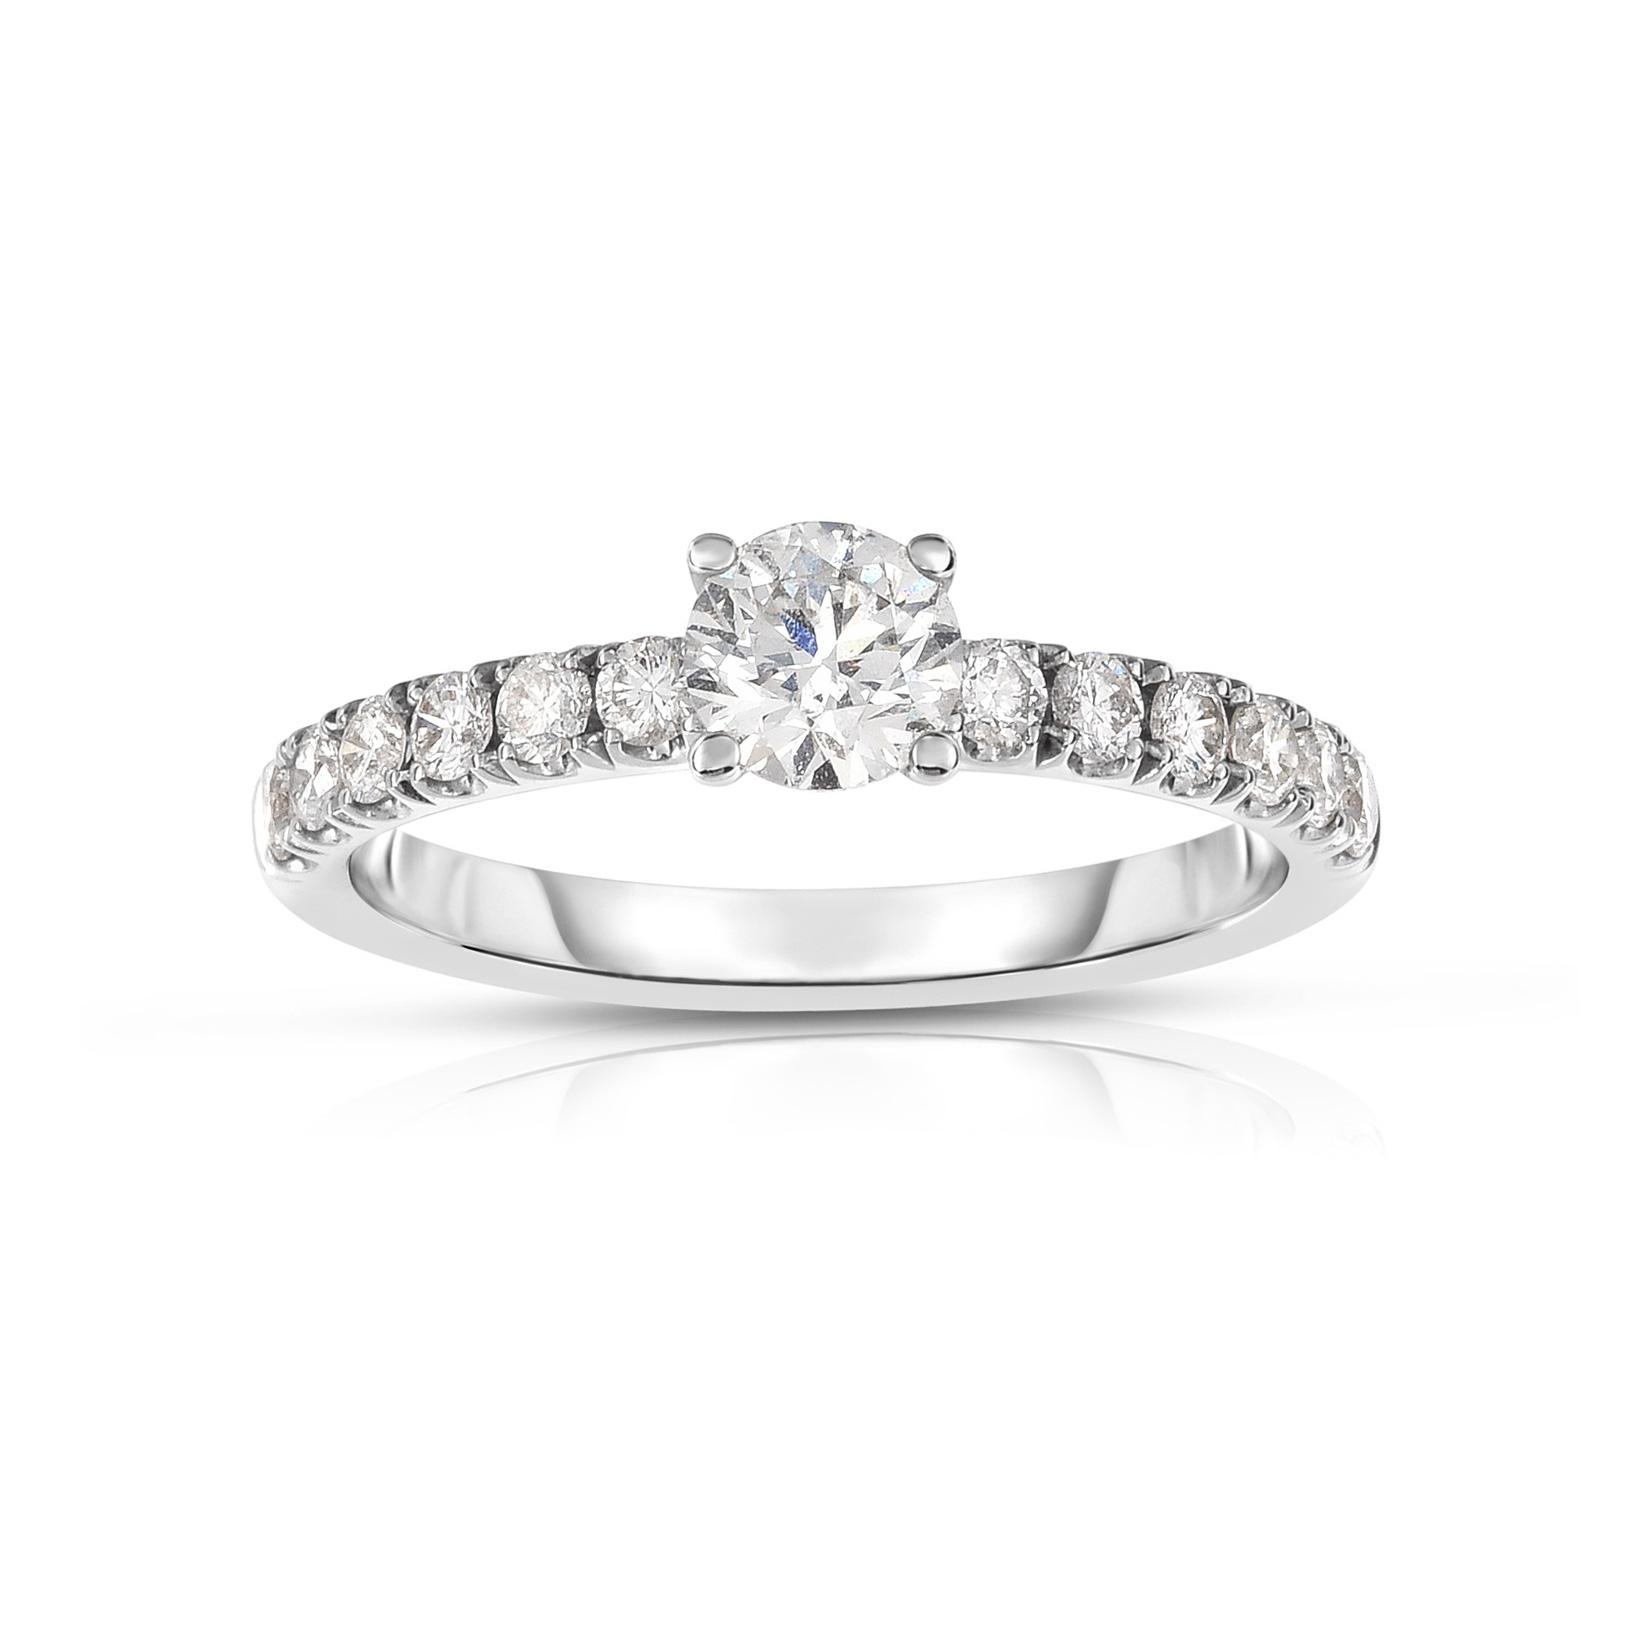 White Gold Pave Diamond Engagement Ring with .50 CT Round Diamond Center